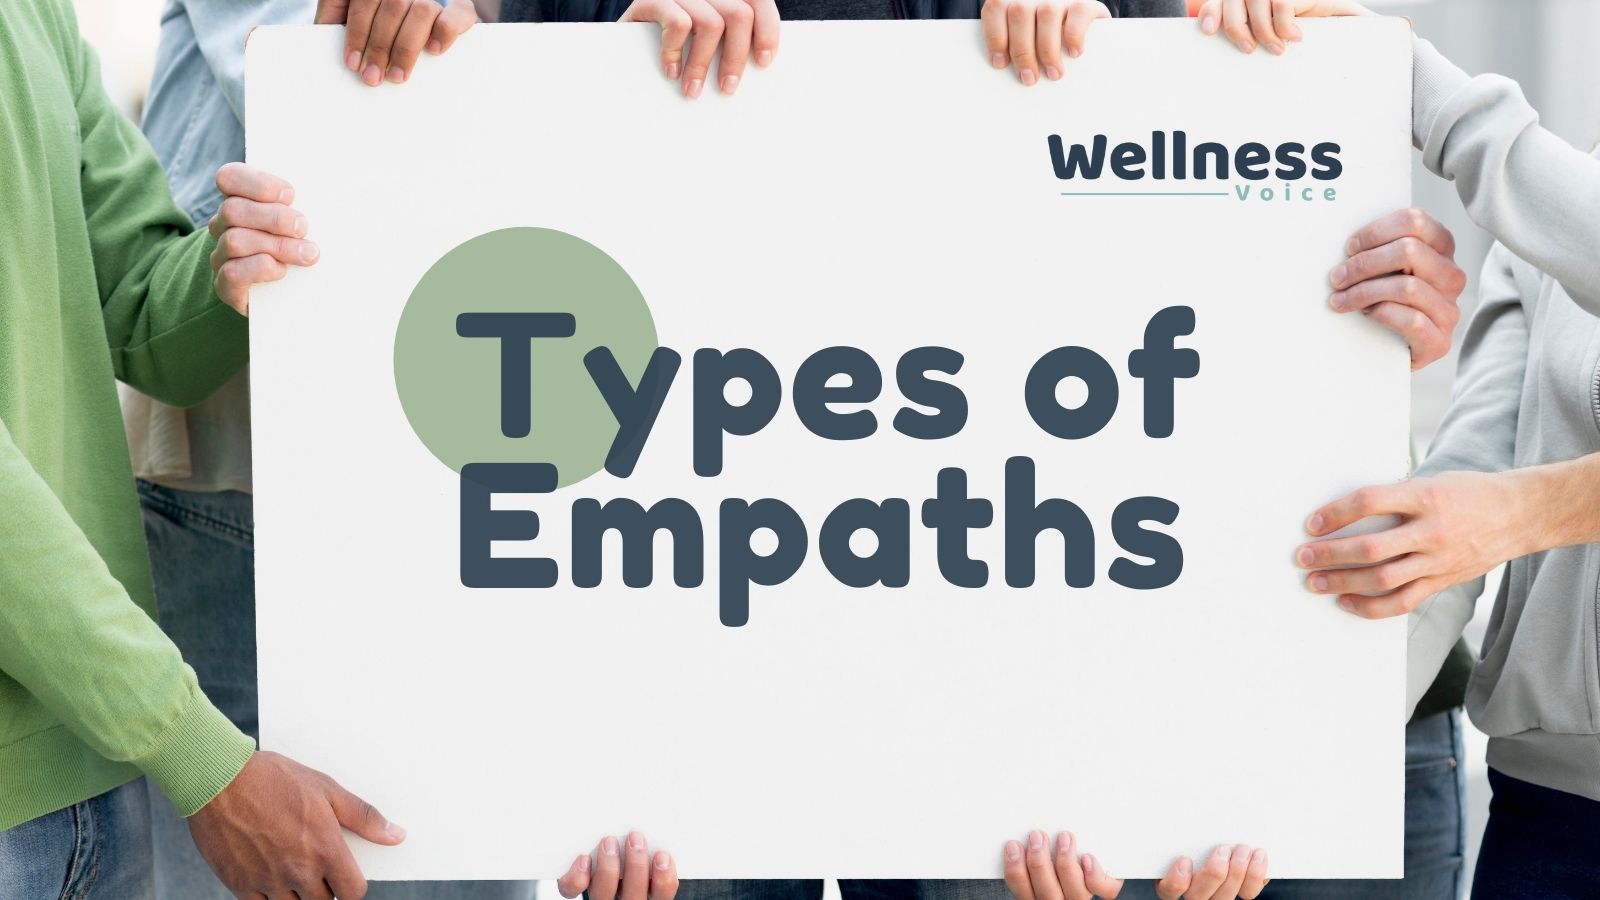 5 Types of Empaths: Know Your Personality Type